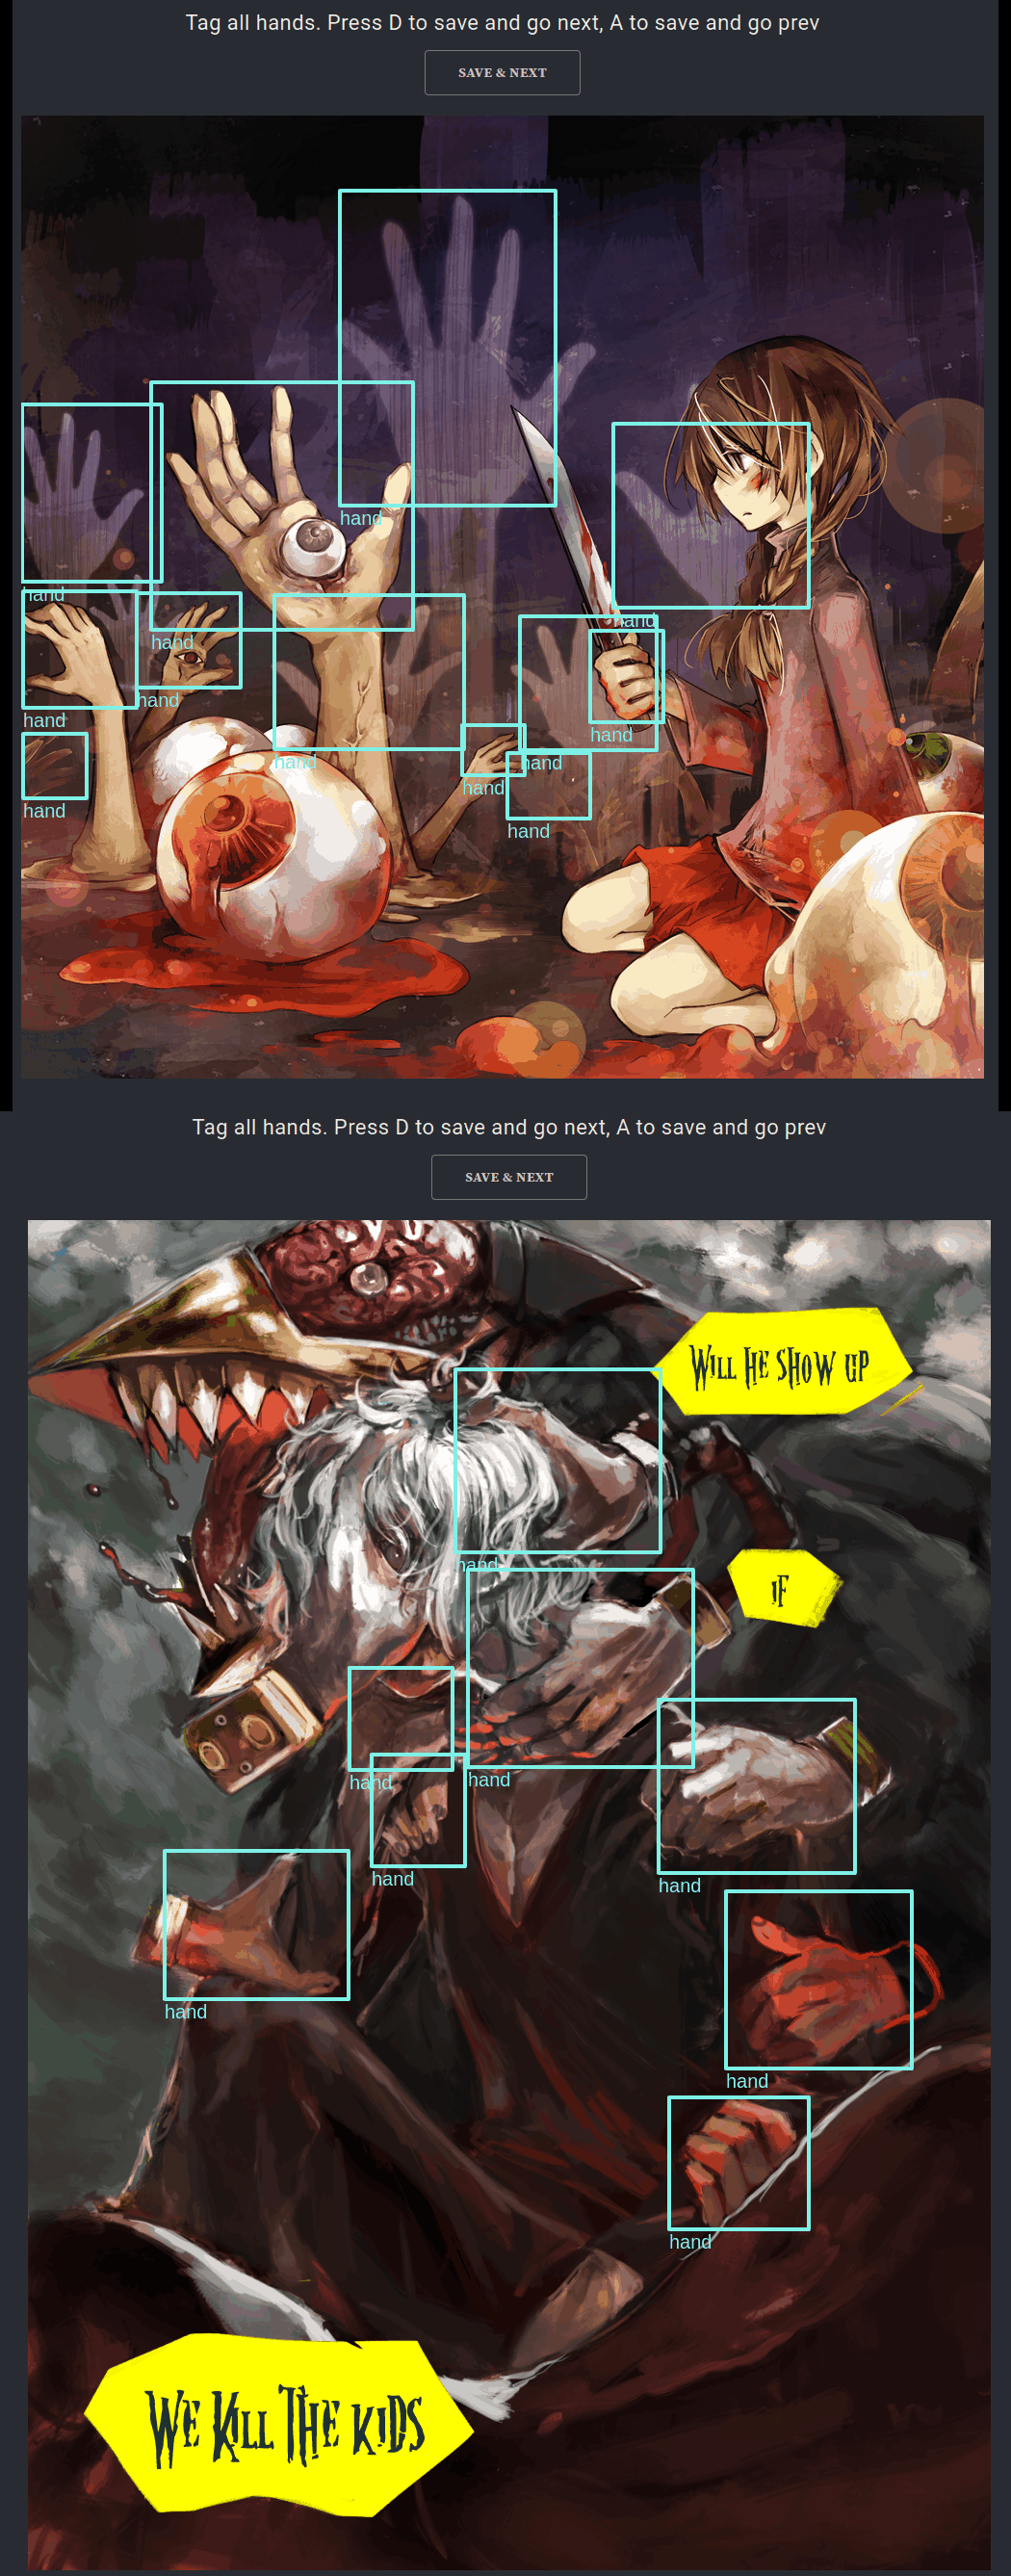 Example of annotating hands in the website for 2 particularly challenging Danbooru2019 images